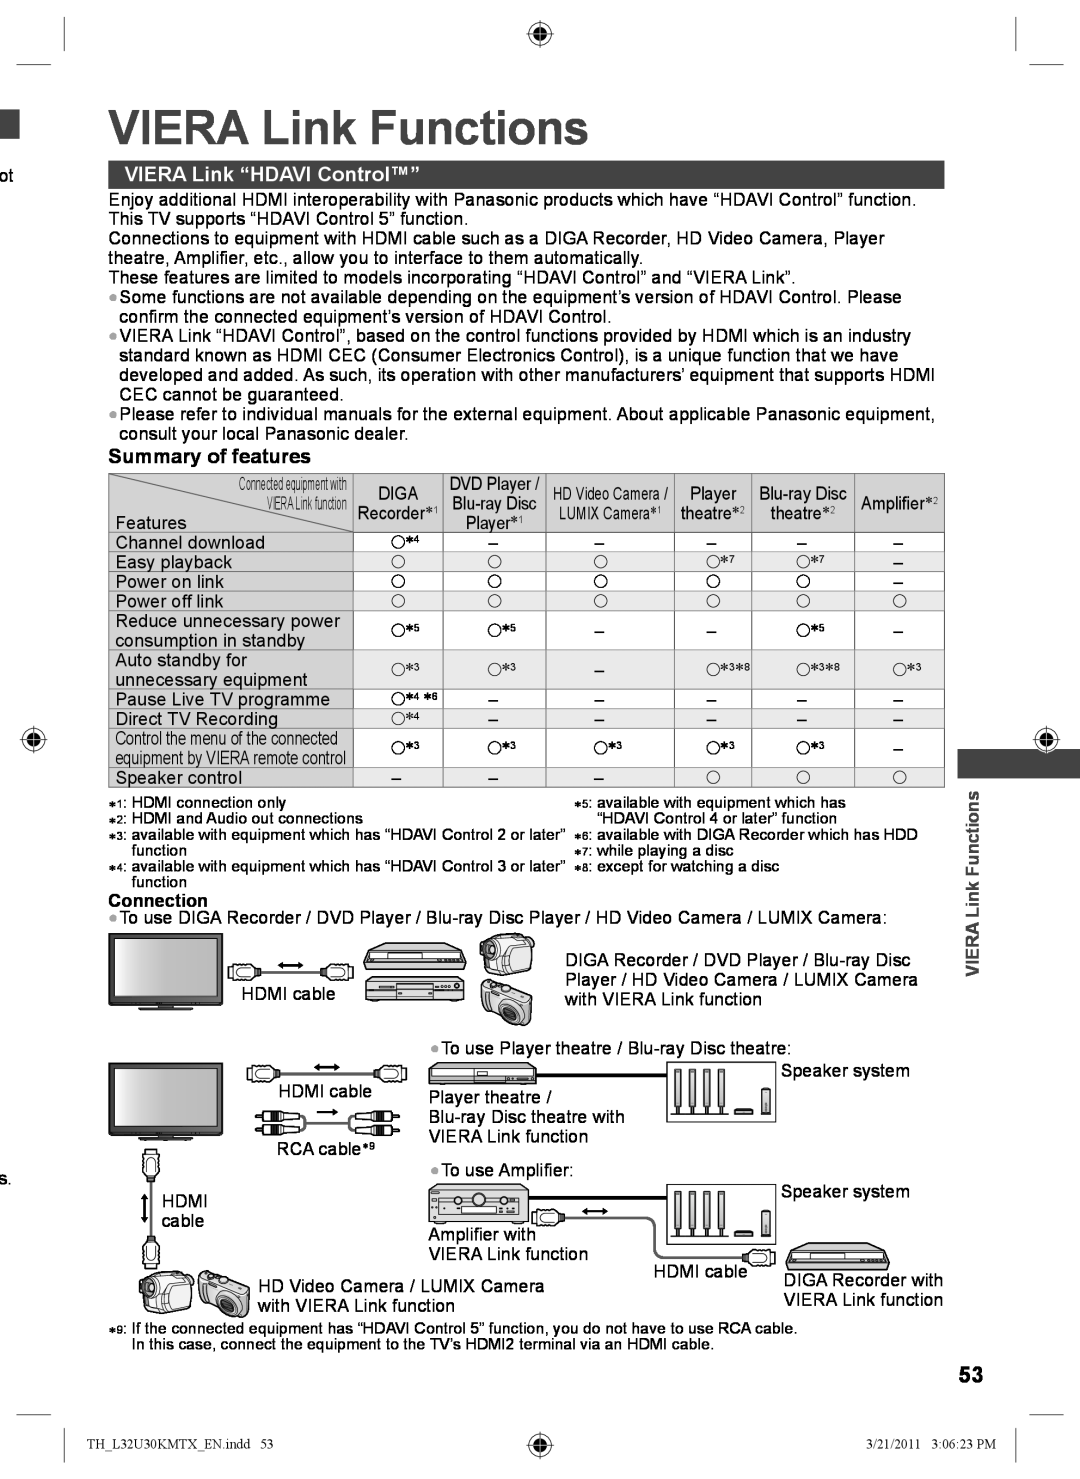 Panasonic TH-L32U30X, TH-L32U30T manual VIERA Link Functions, VIERA Link “HDAVI Control”, Summary of features, Connection 